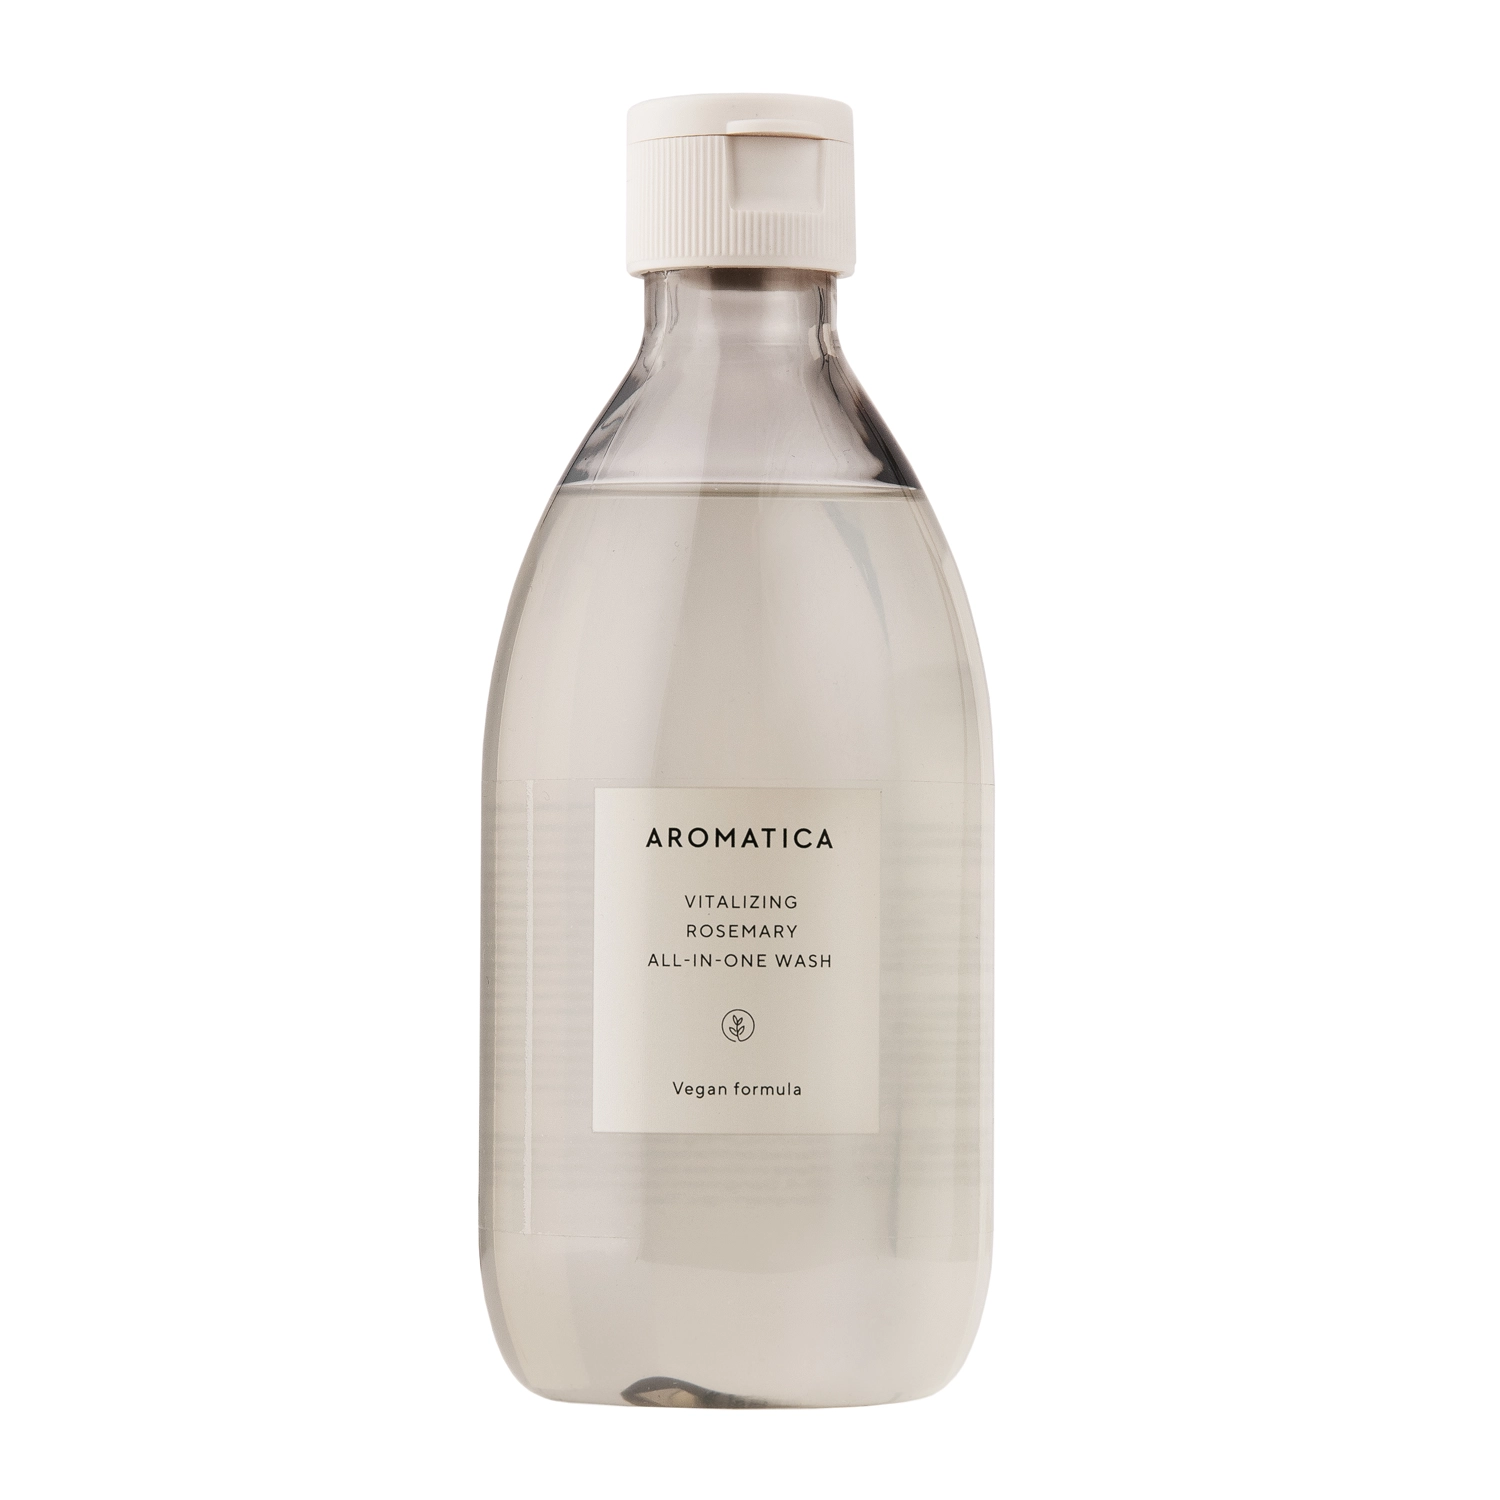 Aromatica - Vitalizing Rosemary All-in-One Wash - 300ml